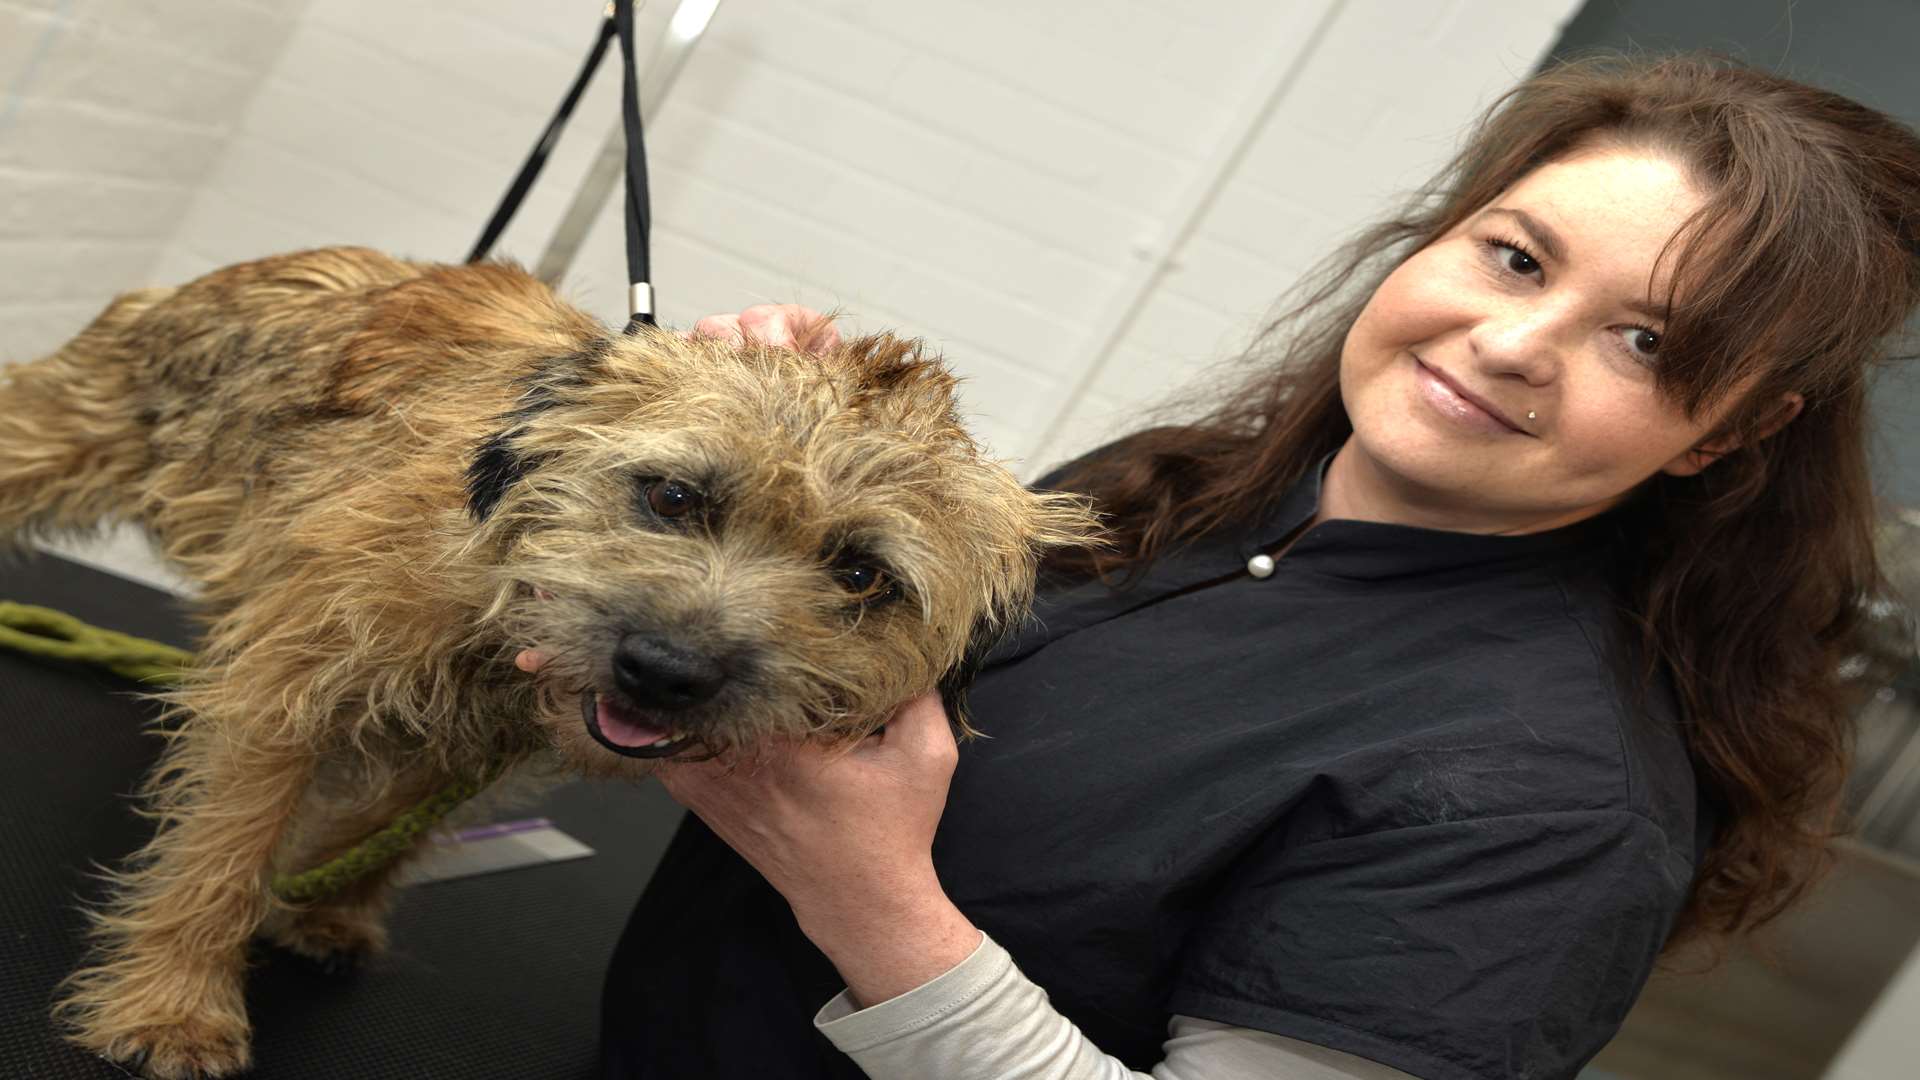 Becky has just set up a dog grooming service at Brogdale Farm in Faversham